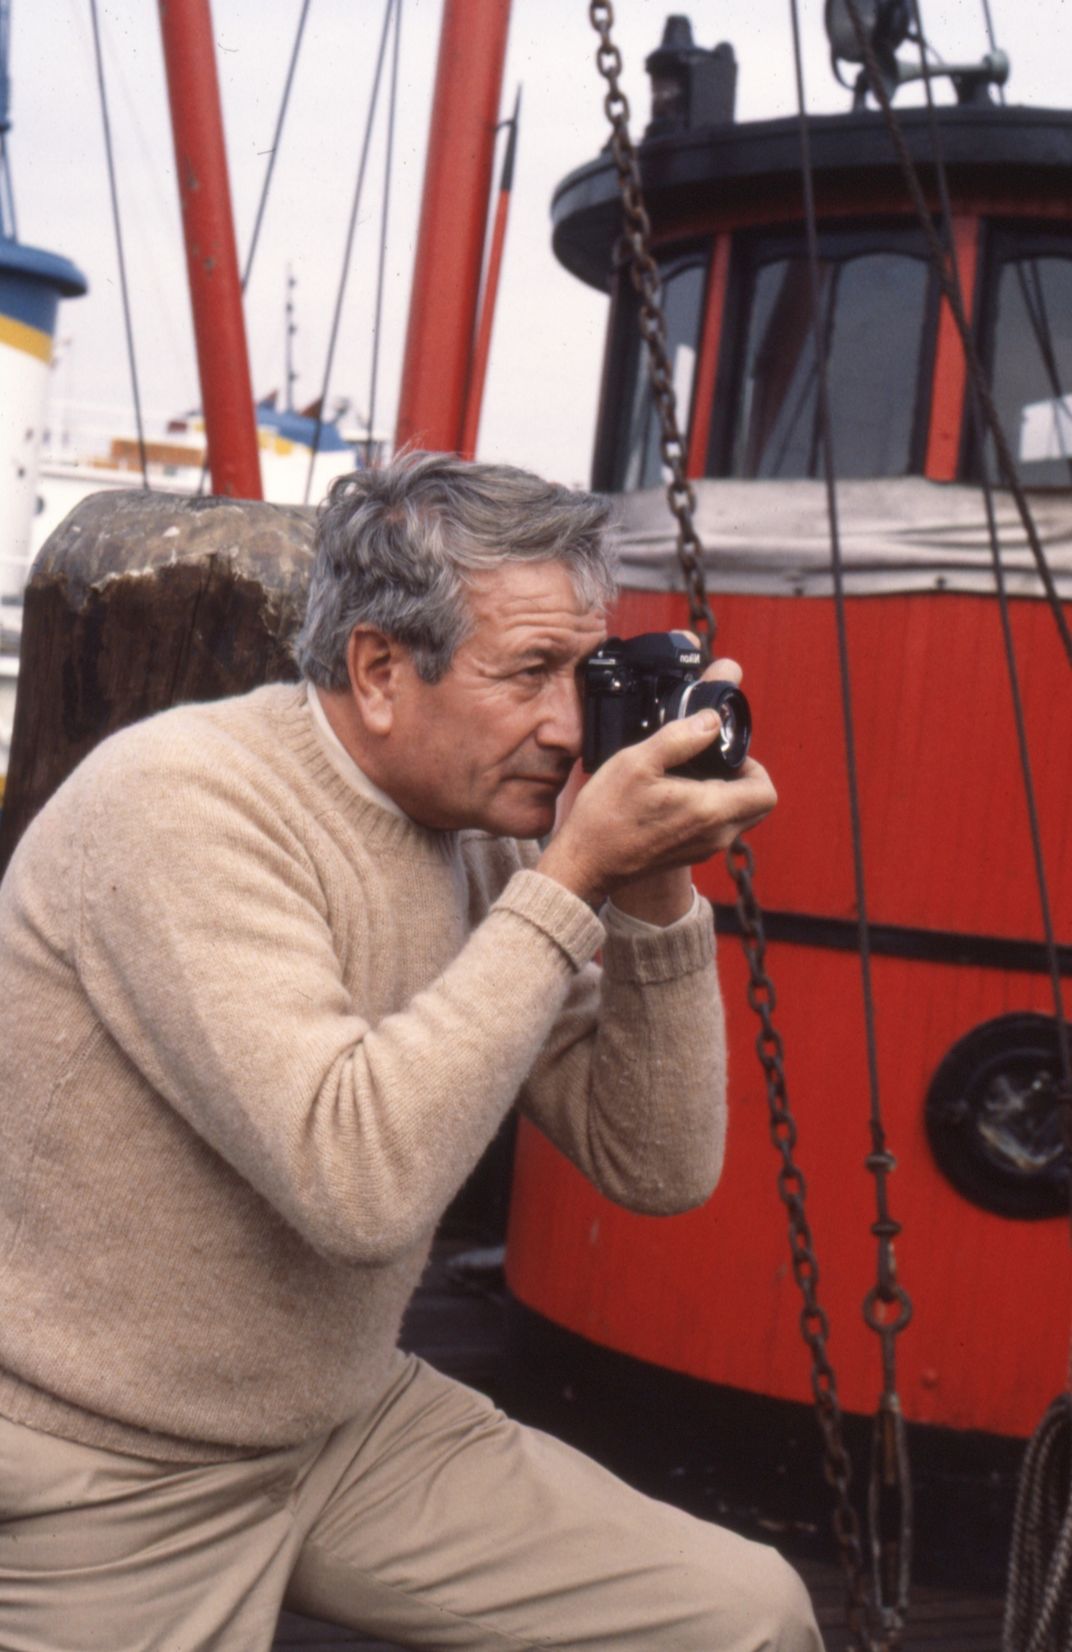 A man with grey hair and beige sweater holds a camera to his eye, presumably shooting photographs against a backdrop of marine craft.